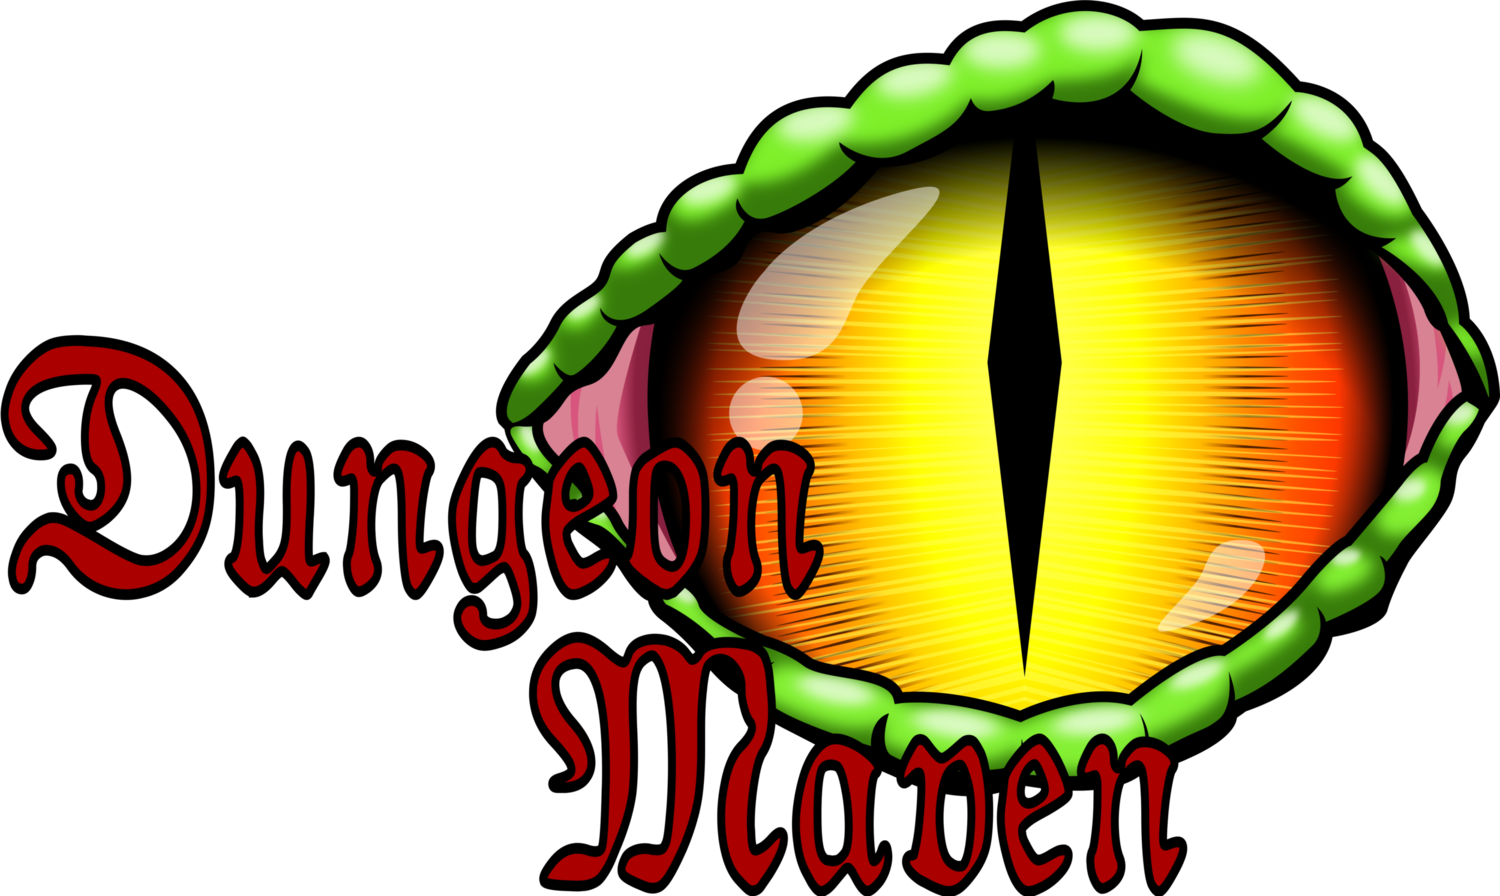 The Dungeon Maven